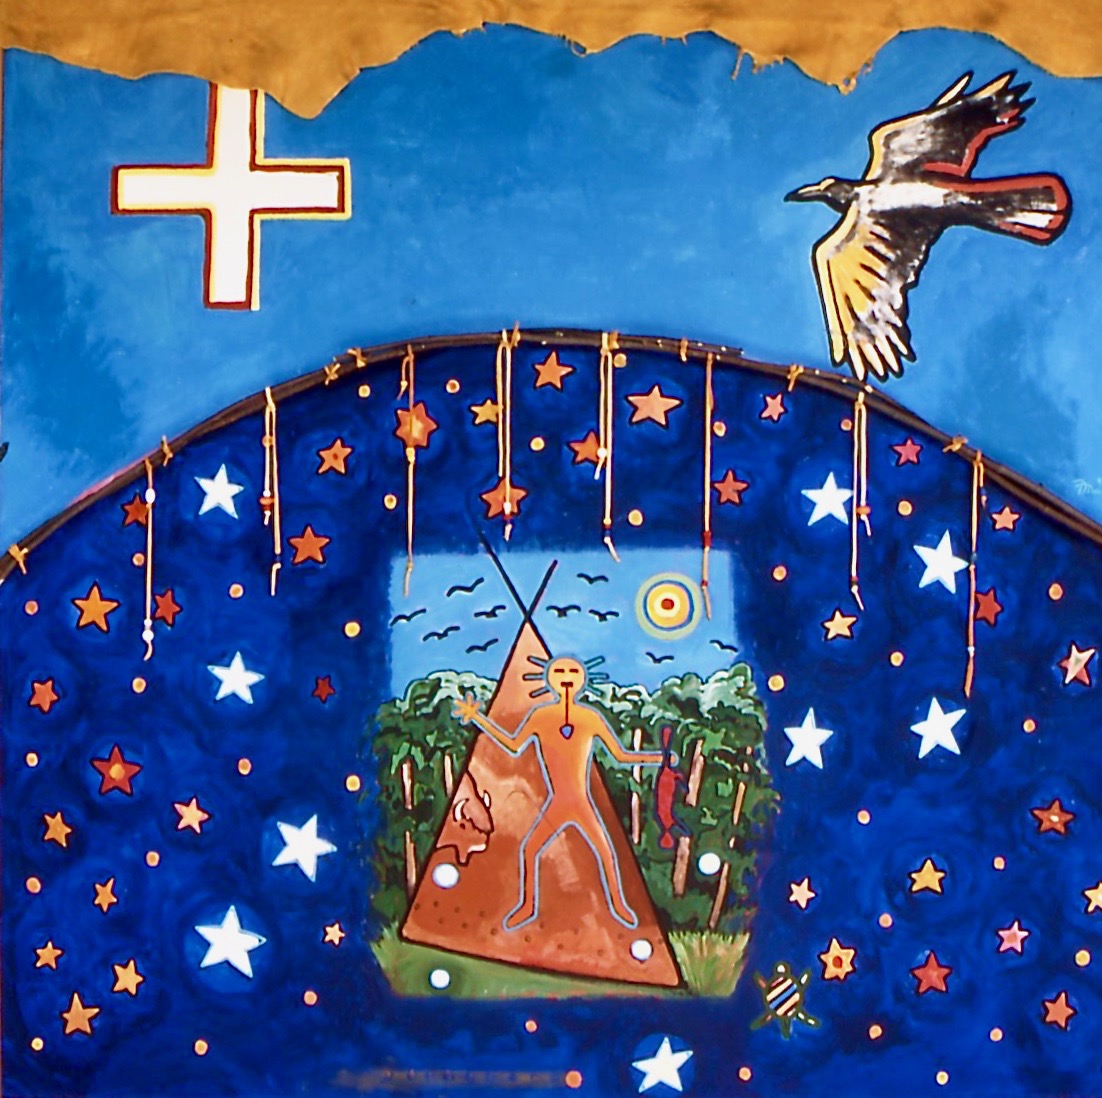 painting of traditional cree symbols